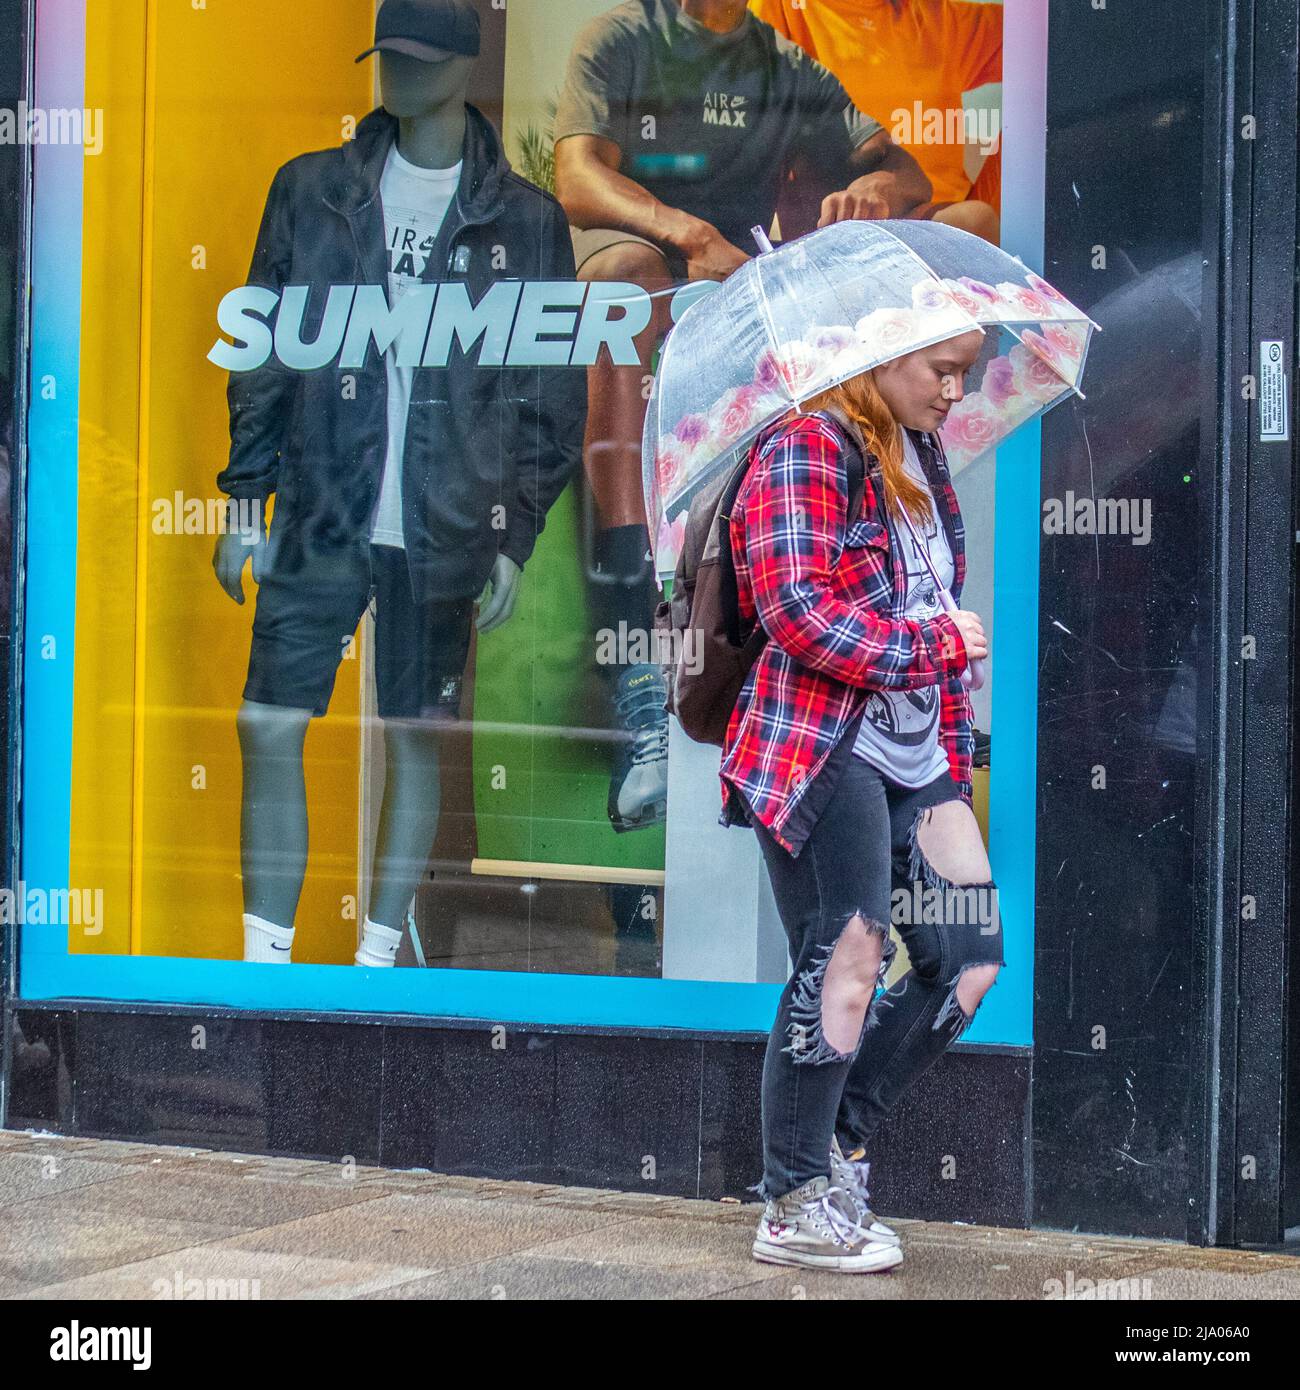 Preston, Lancashire.  UK Weather 26 May 2022.  No signs of summer season as yet another rainy start to the day for shops, shoppers and shopping in Preston. A dull and wet start to today, with spells of rain moving in.  Credit. MediaWorldImages/AlamyLiveNews Stock Photo